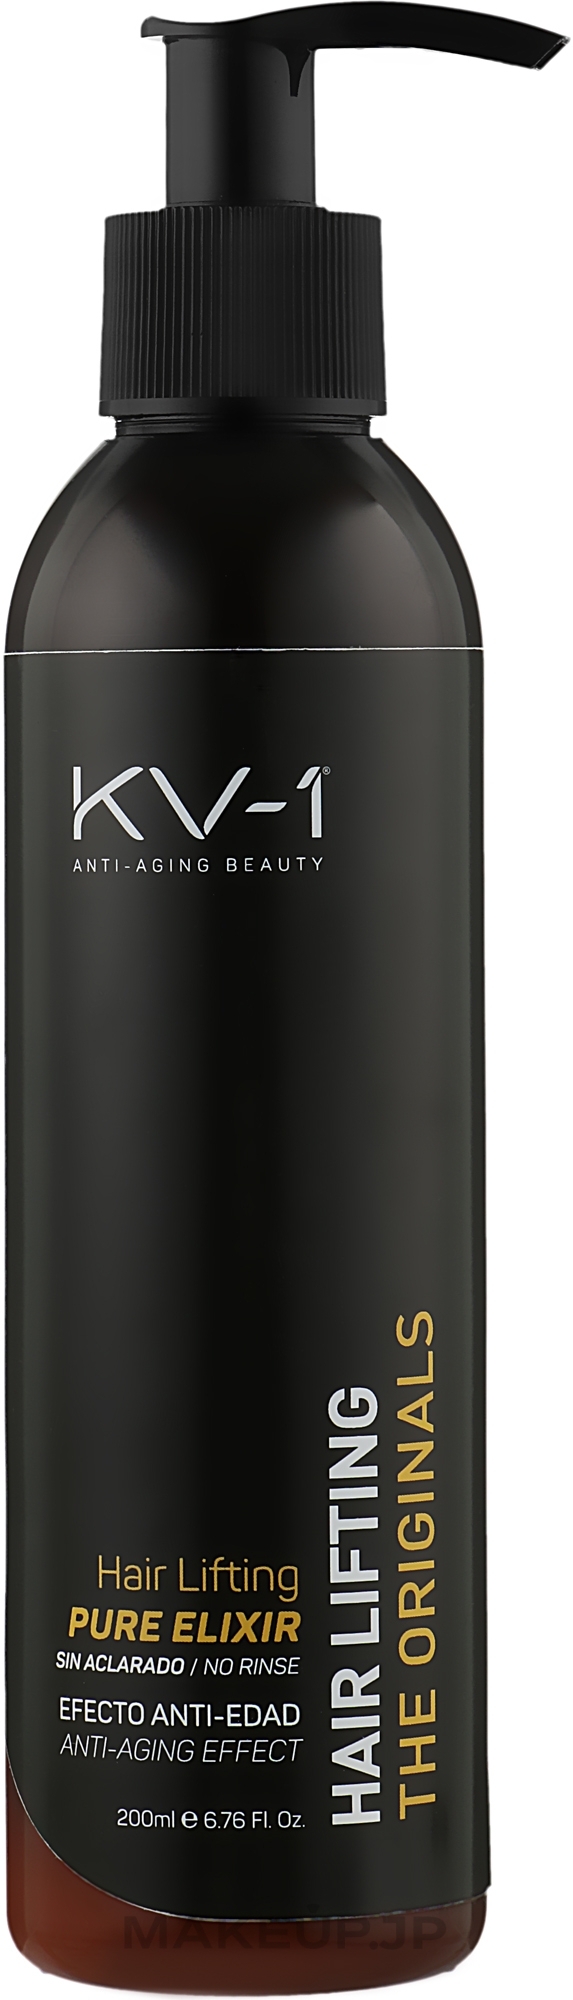 Leave-In Lifting Cream with Grape Seed Oil - KV-1 The Originals Hair Lifting Pure Elixir Cream — photo 200 ml